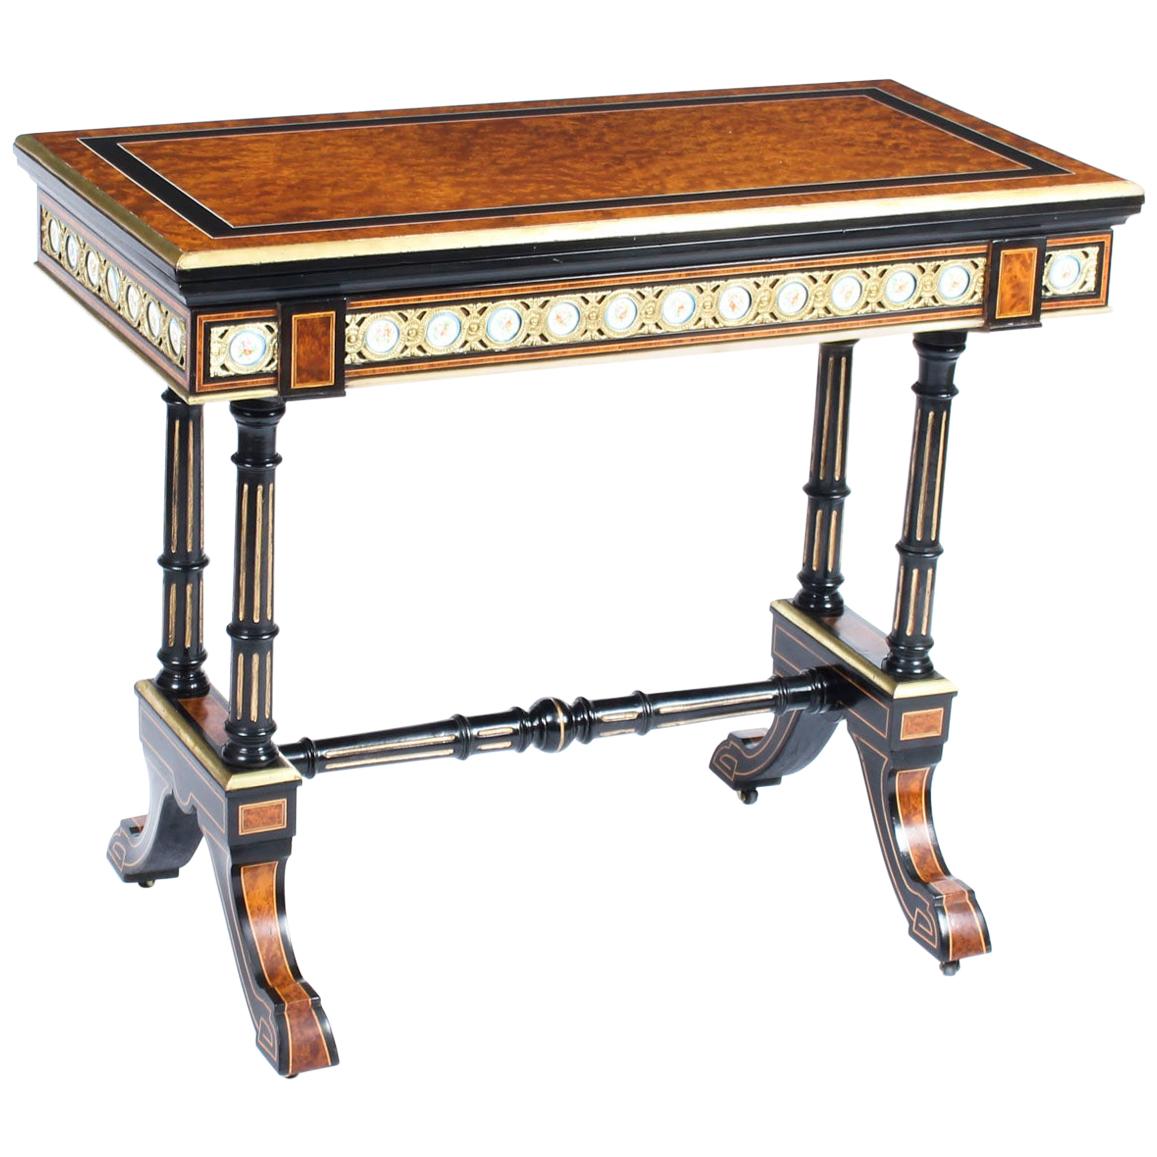 Antique Amboyna Card Table with Porcelain Plaques, 19th Century